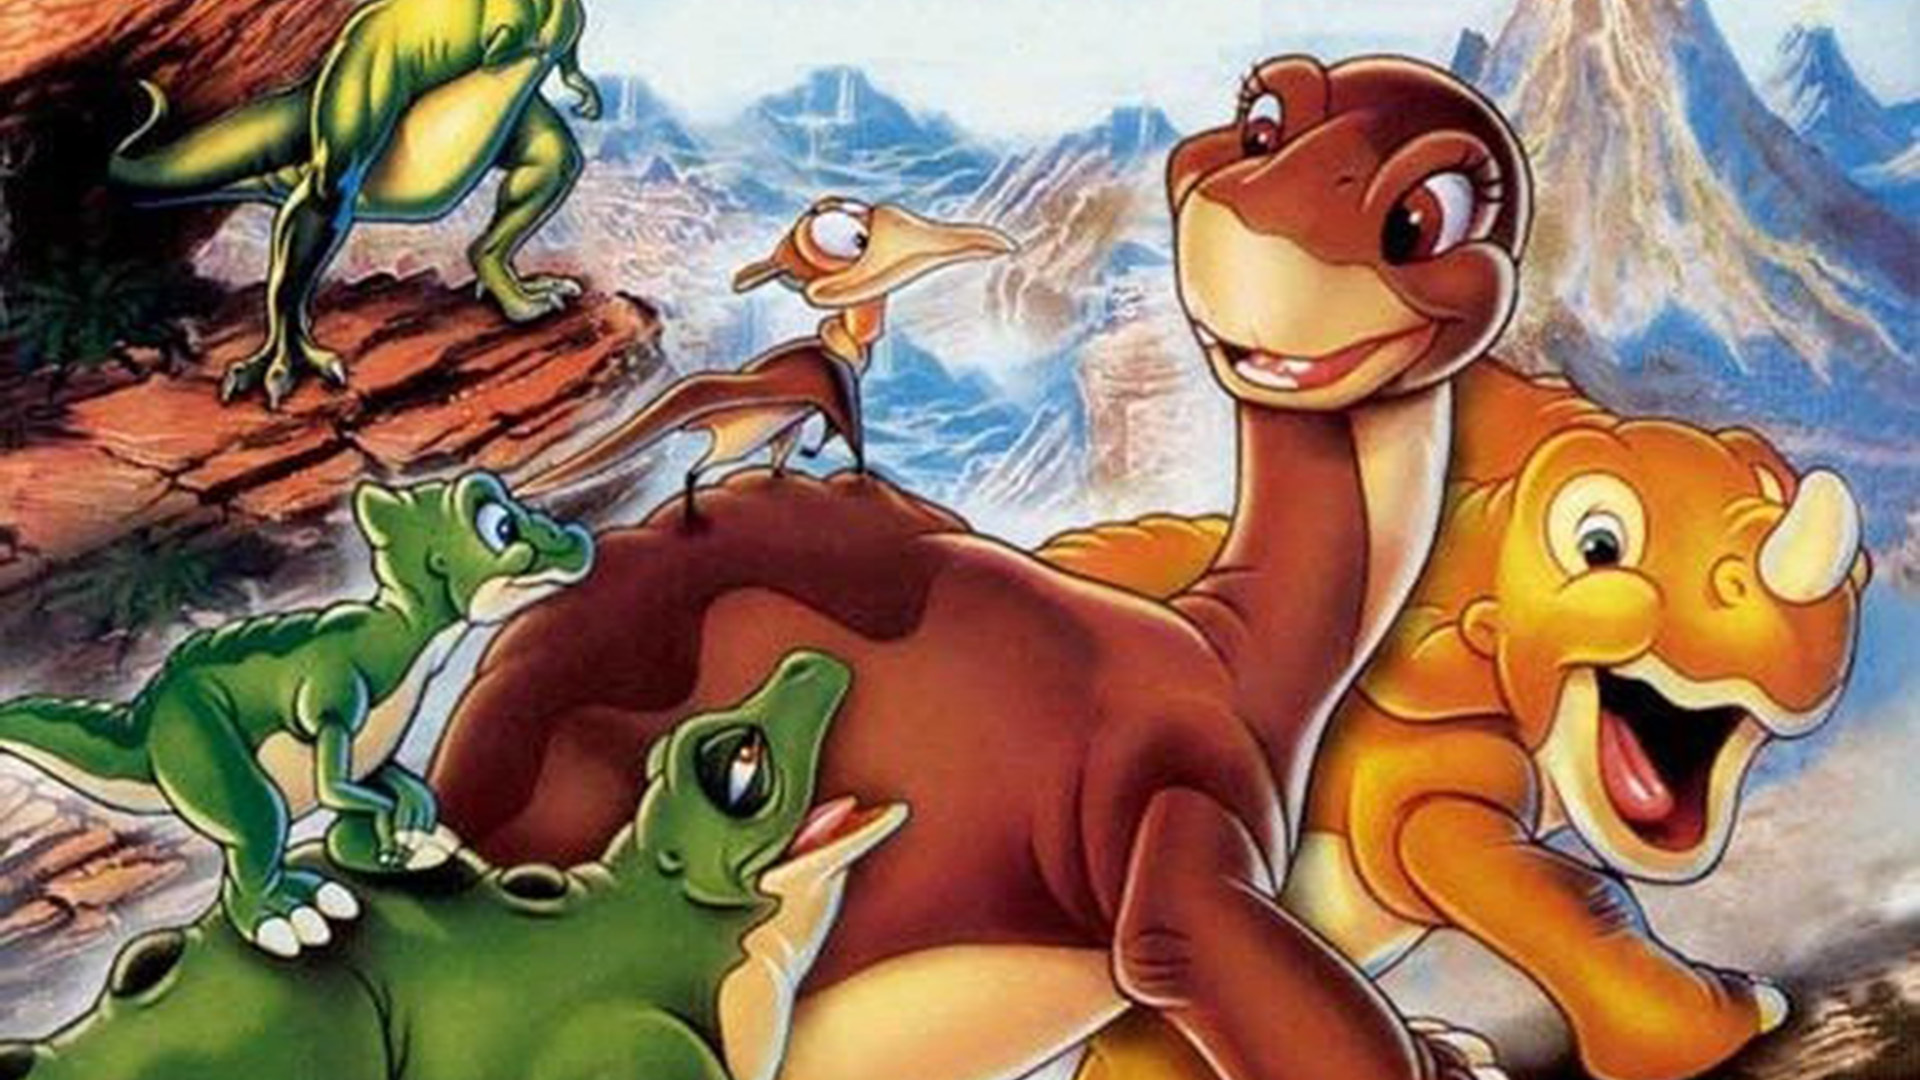 The Land Before Time Animated Movie Wallpaper All HD